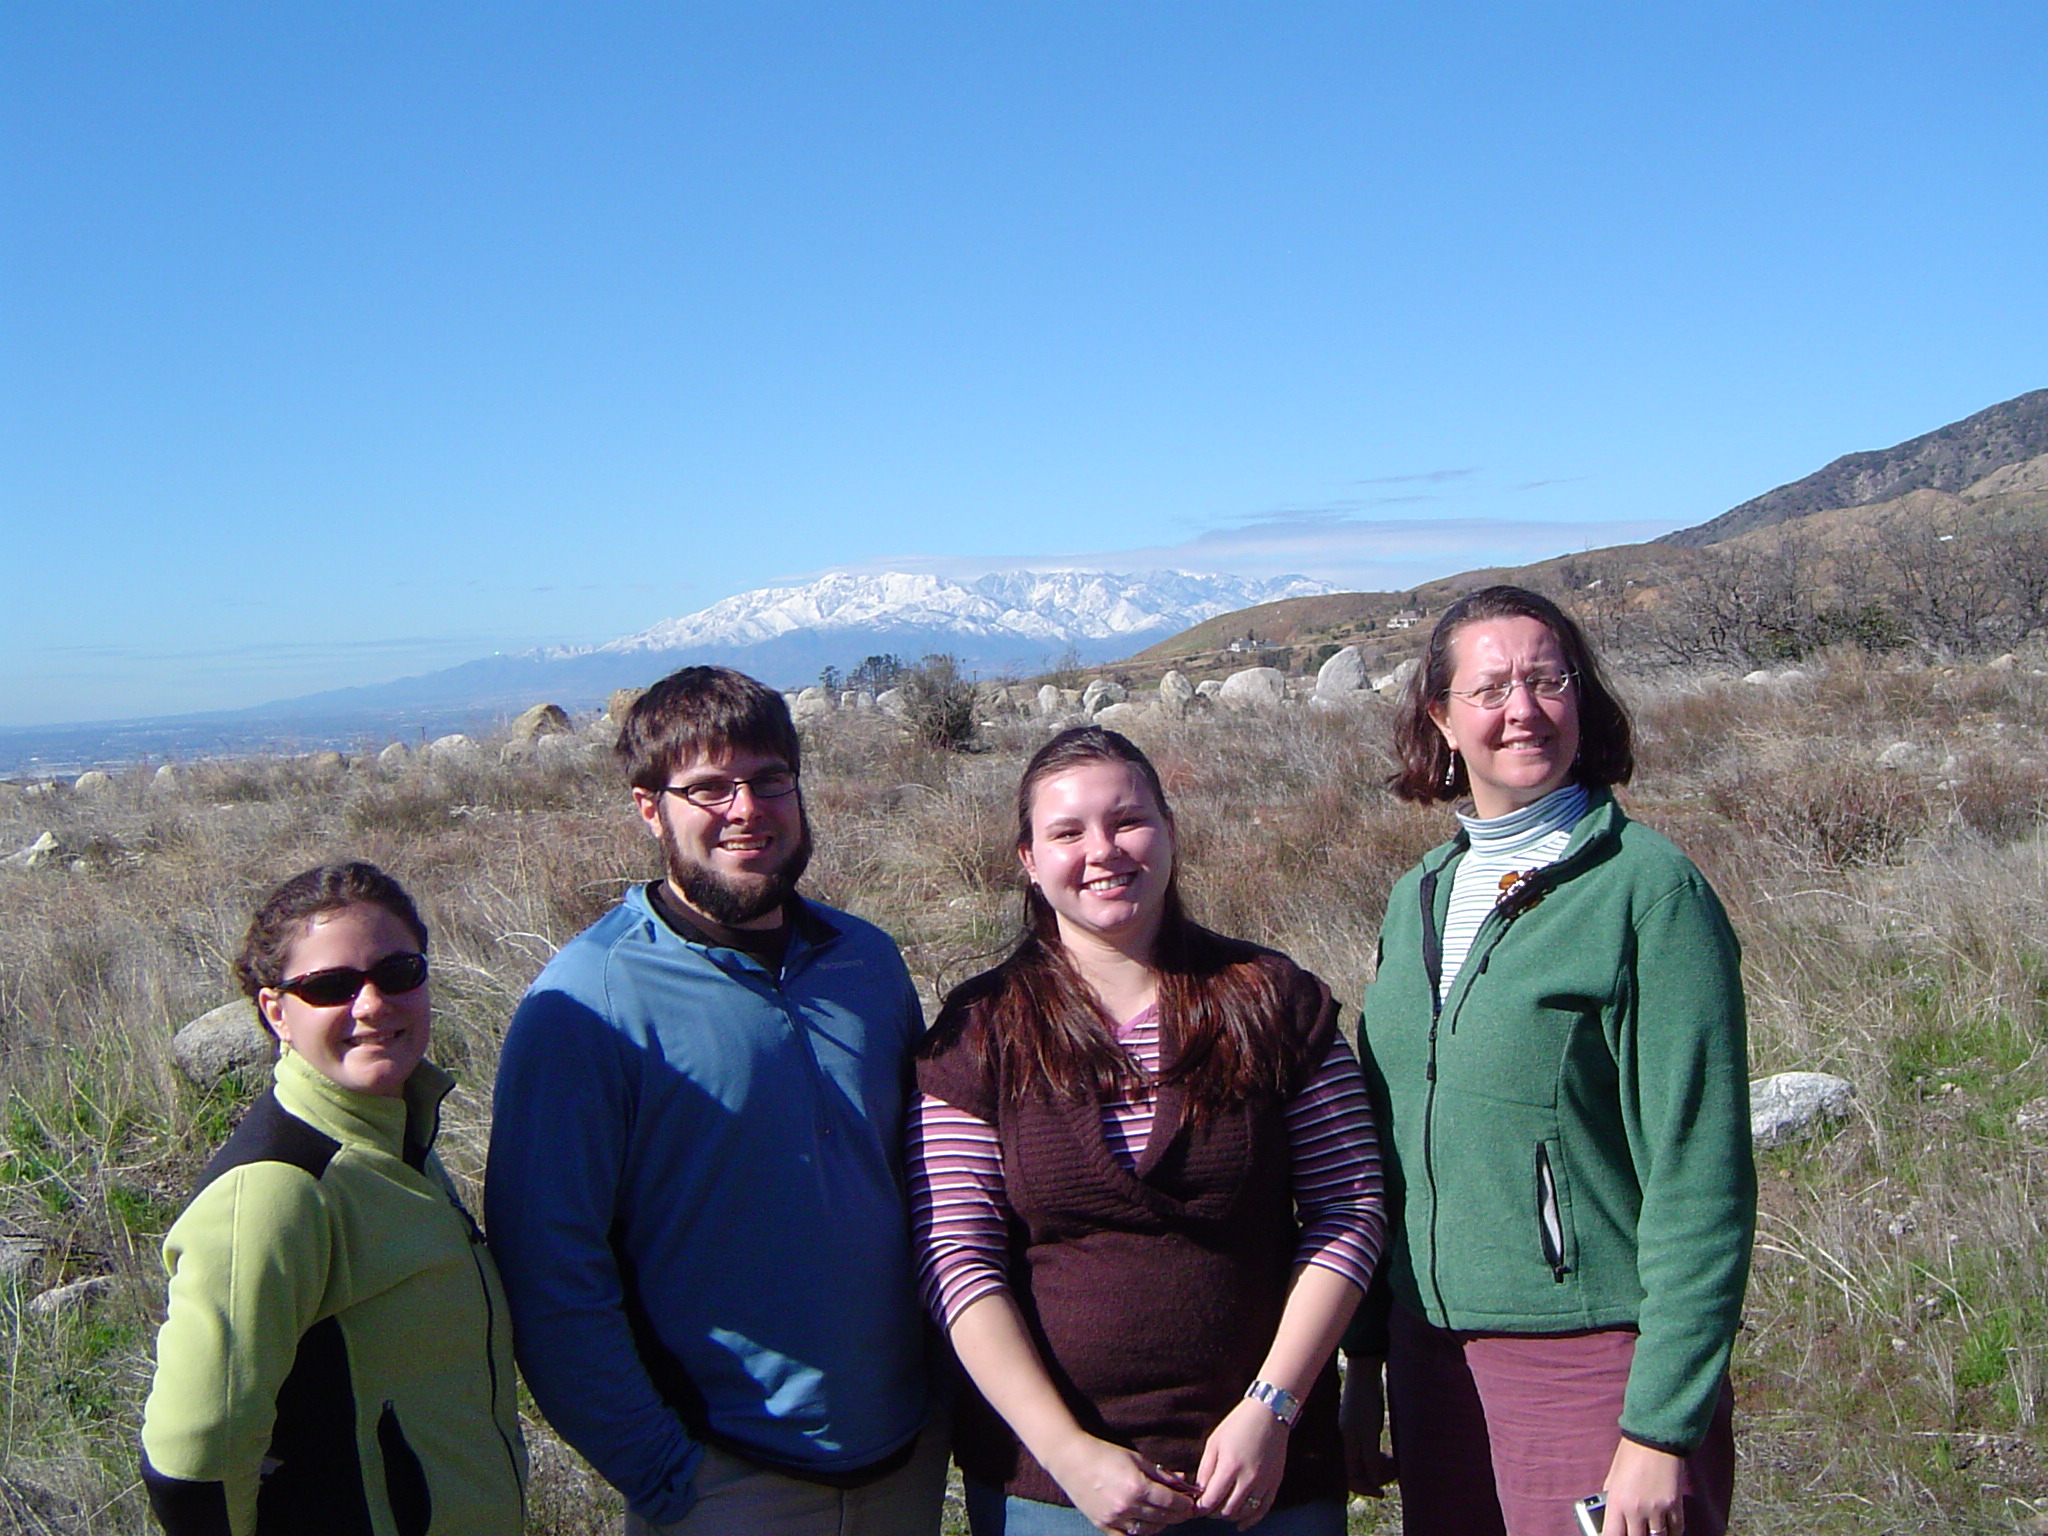 Laura, Scott, Erin and Michele in front of the San Bernardino Moutains